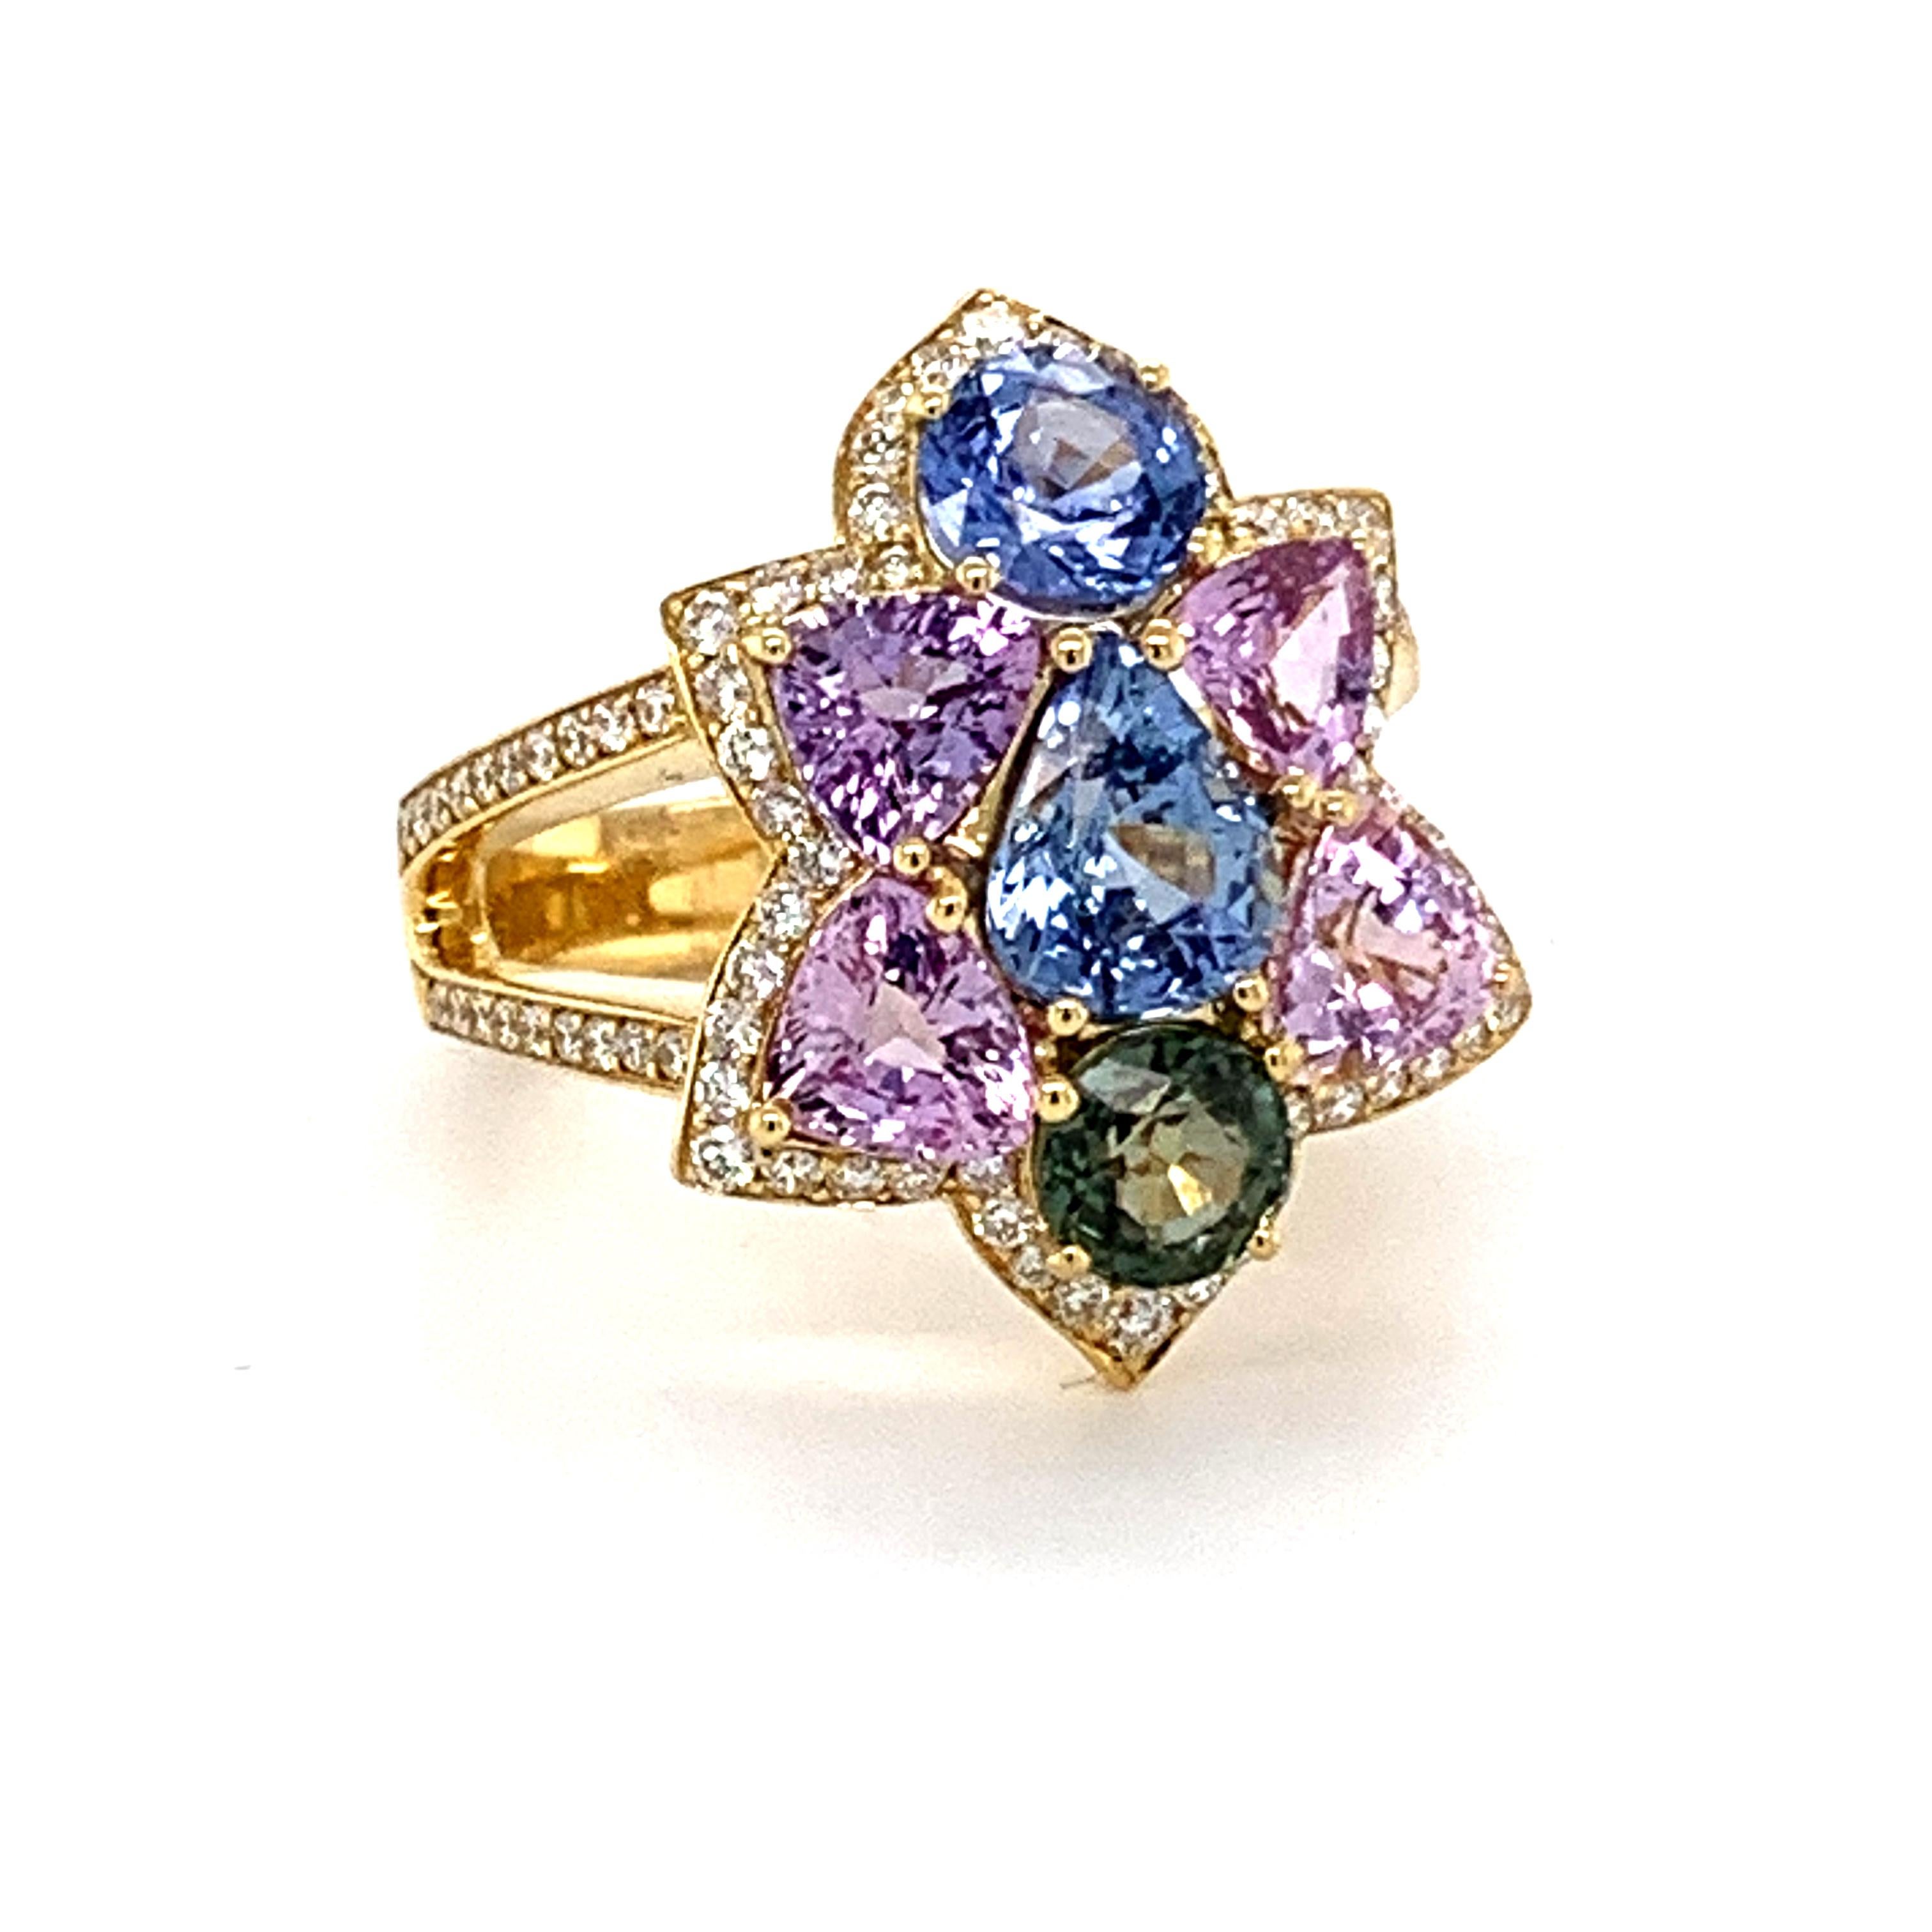 Unusual and one of the kind engagement 18 karat yellow gold cluster ring set with ice cream colors non heated natural sapphires,
blue, pink, lavender and green.
5.36 carats in weight and .57 carats in pave diamonds FG color VVS1 clarity.